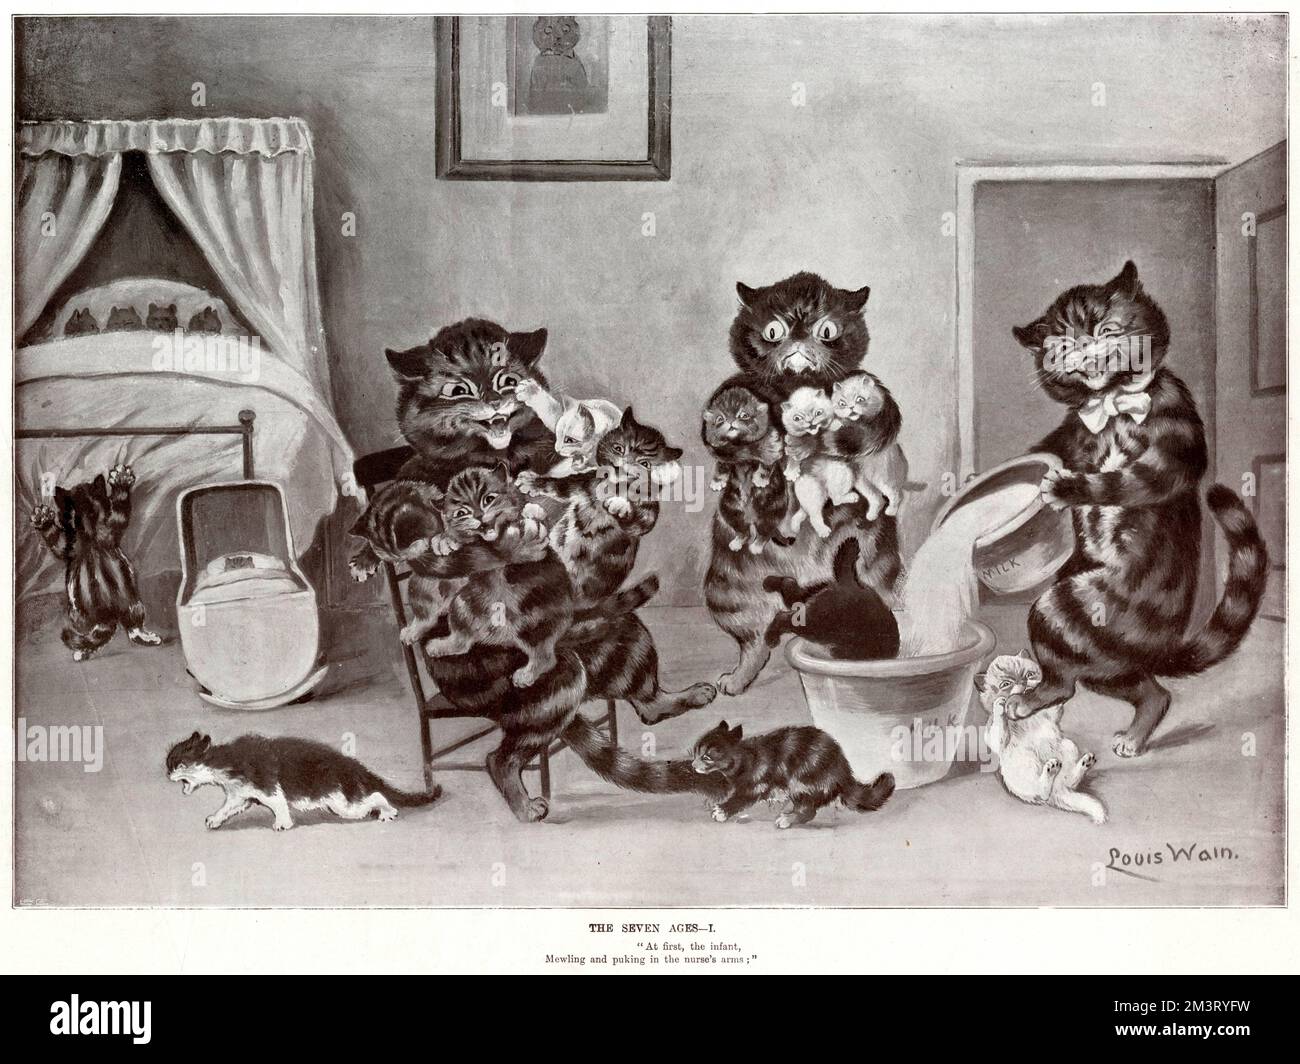 Supplement, The Seven Ages by Louis Wain - One. &quot;At first, the infant, mewling and puking in the nurse's arms.&quot; (Shakespeare) Three adult cats grapple with a large number of unruly kittens, keeping them well supplied with milk.      Date: 1900 Stock Photo